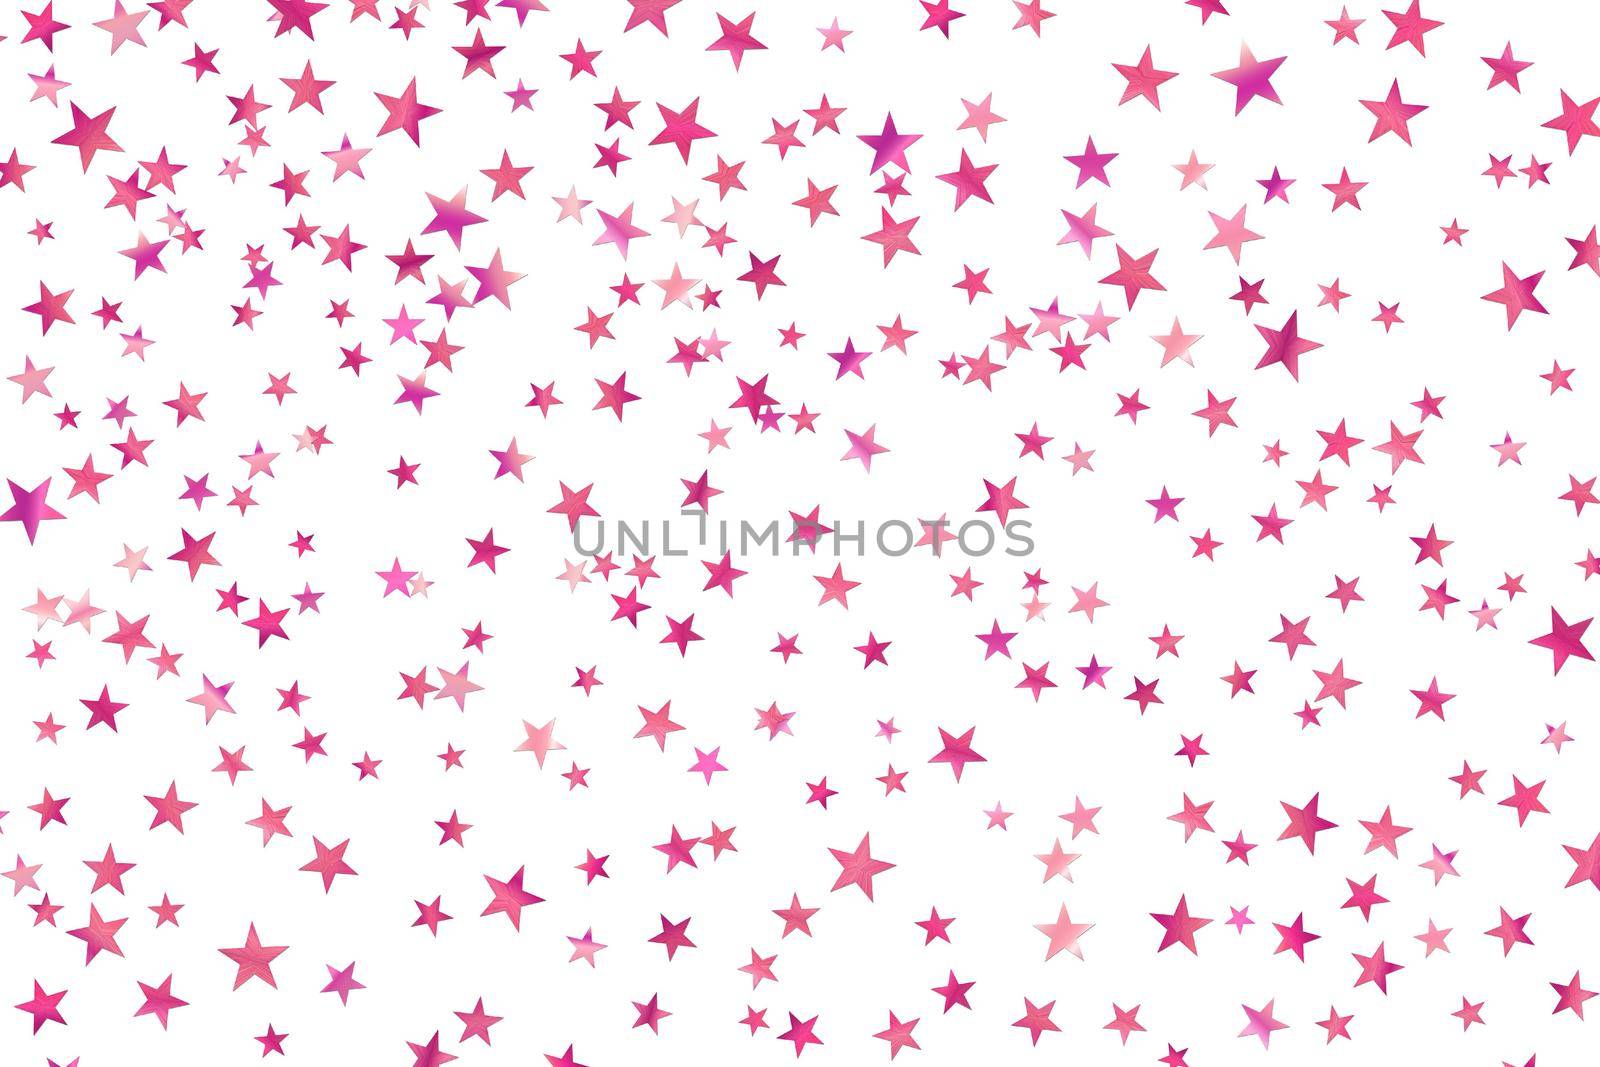 Stars pink glitter confetti isolated on blurred abstract white background. Festive holiday background. Celebration concept. Falling magic gold particles. Invitation mock up. Top view, flat lay